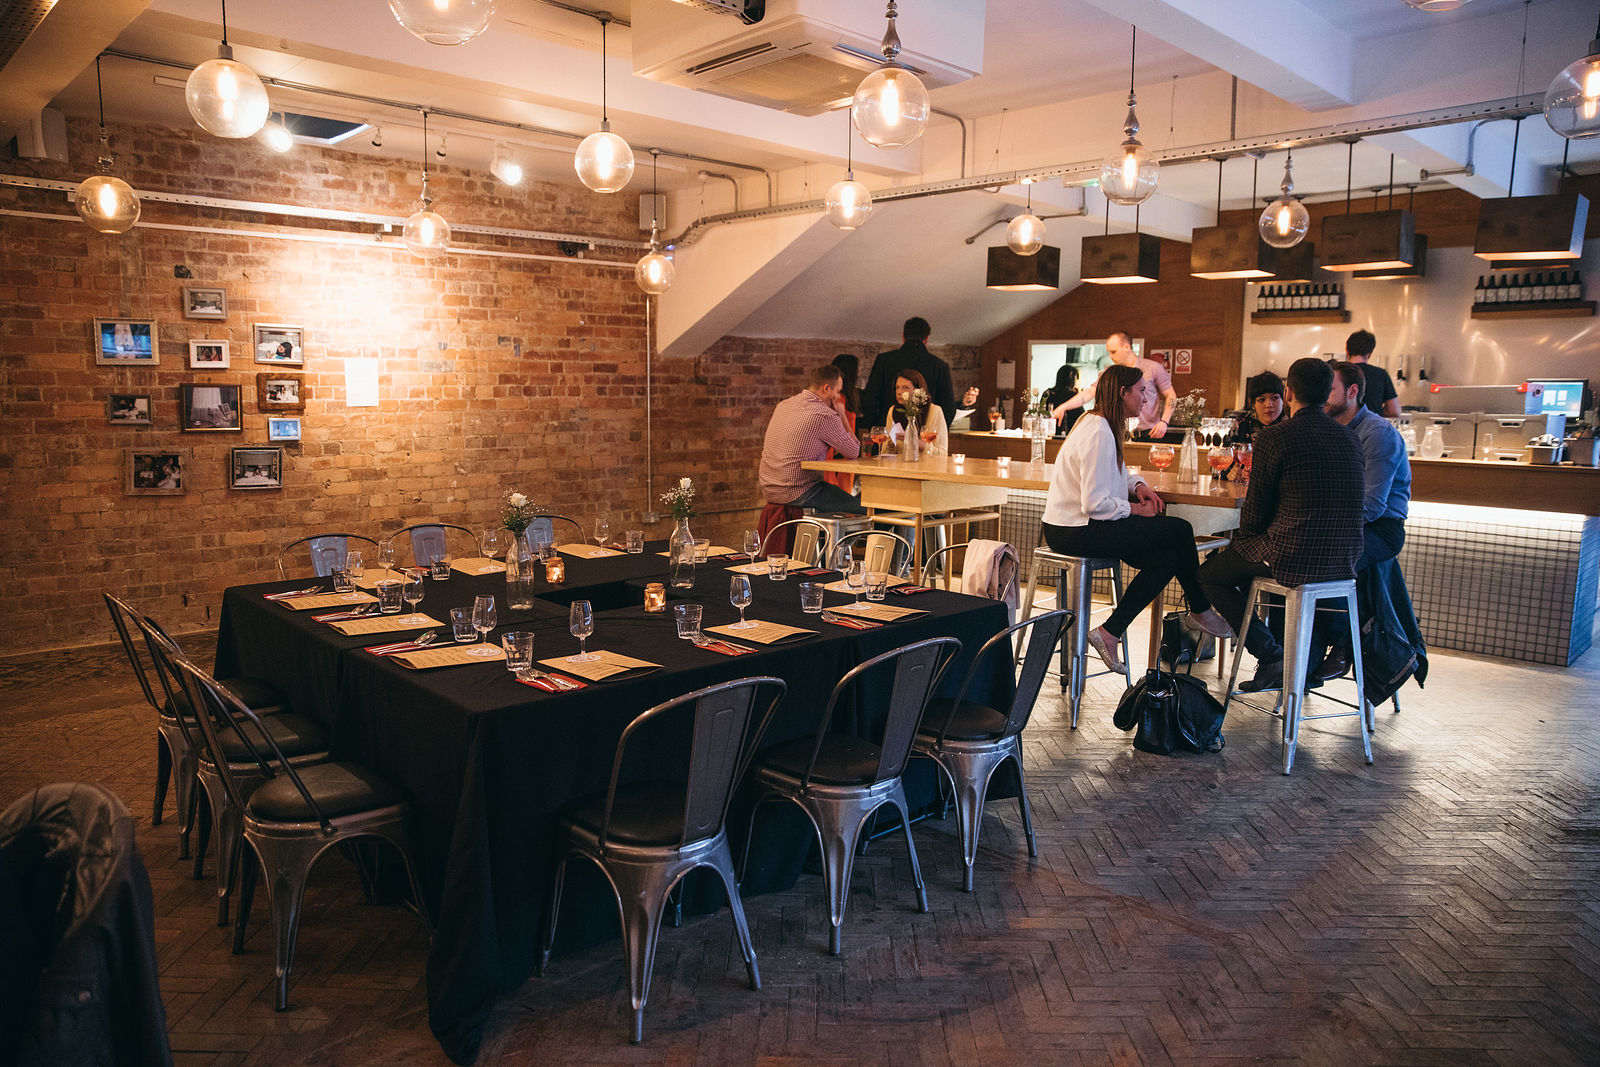 Minimum Miles Travelled: Pop-up Dining Experience